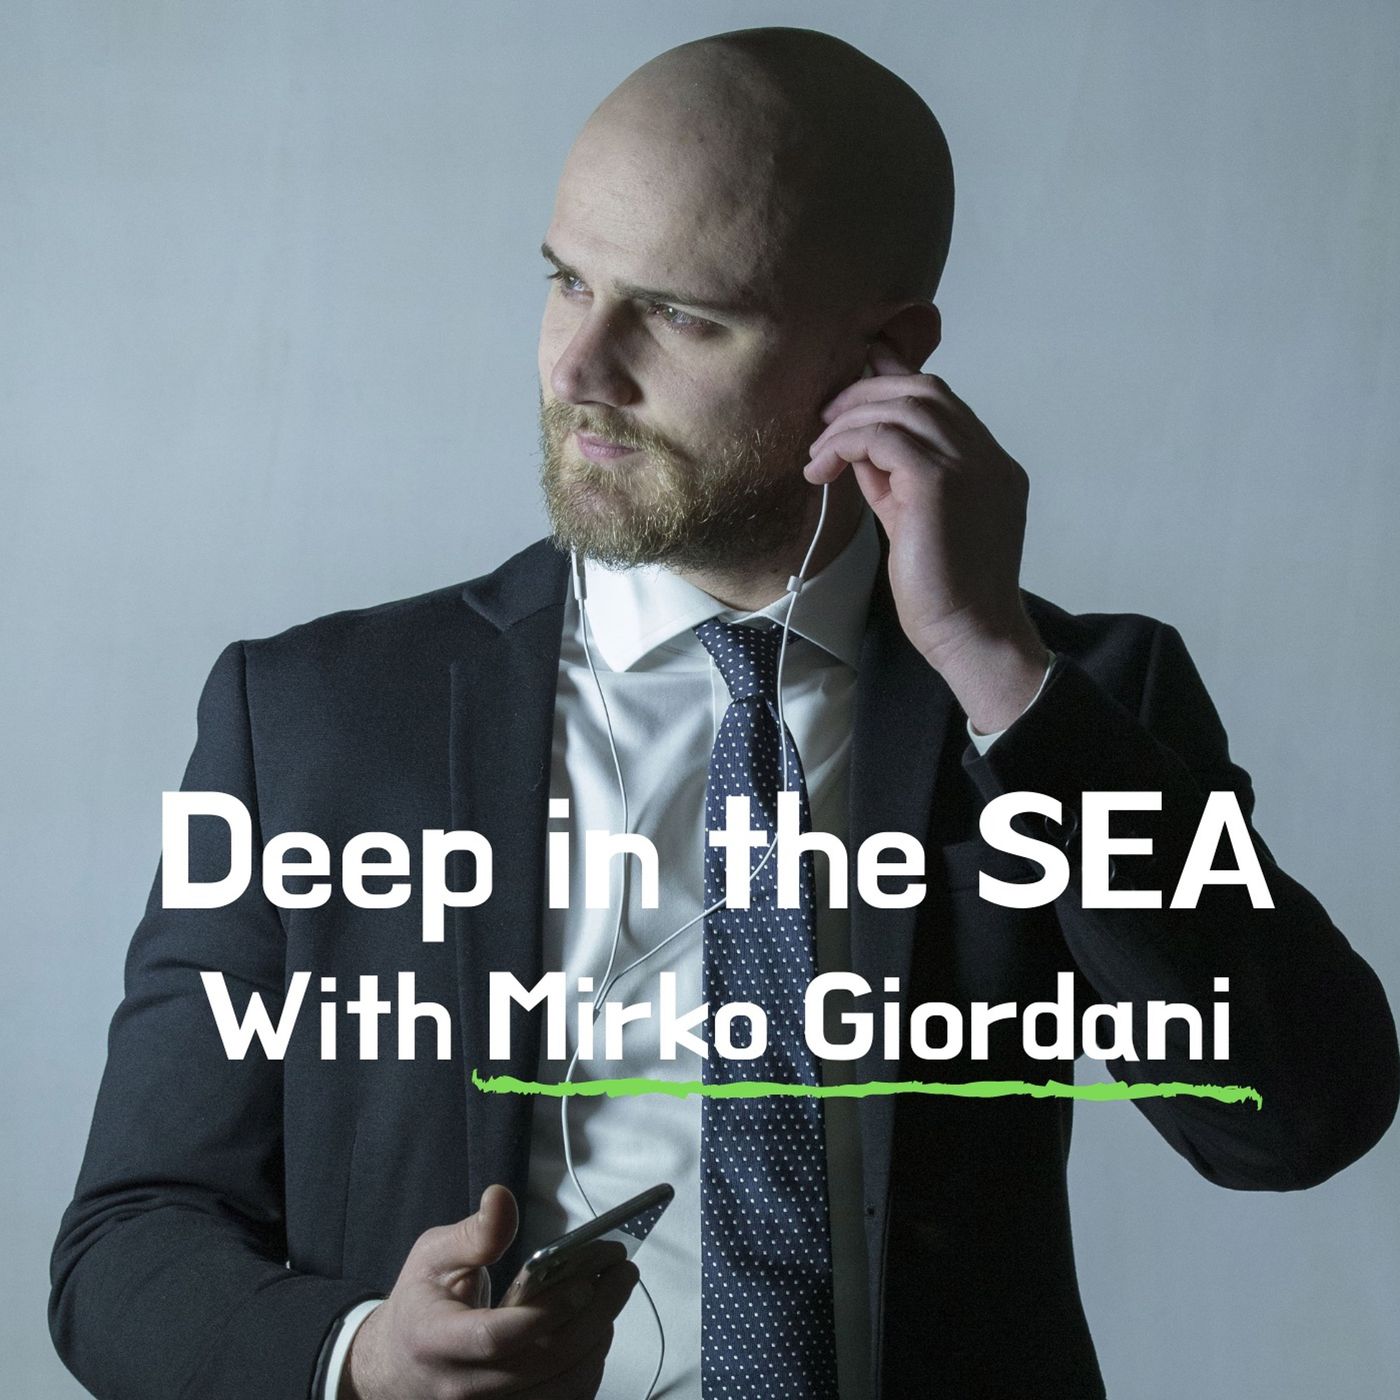 Having a portfolio of investments in SEA? Absolutely yes! - With Paul Podolsky